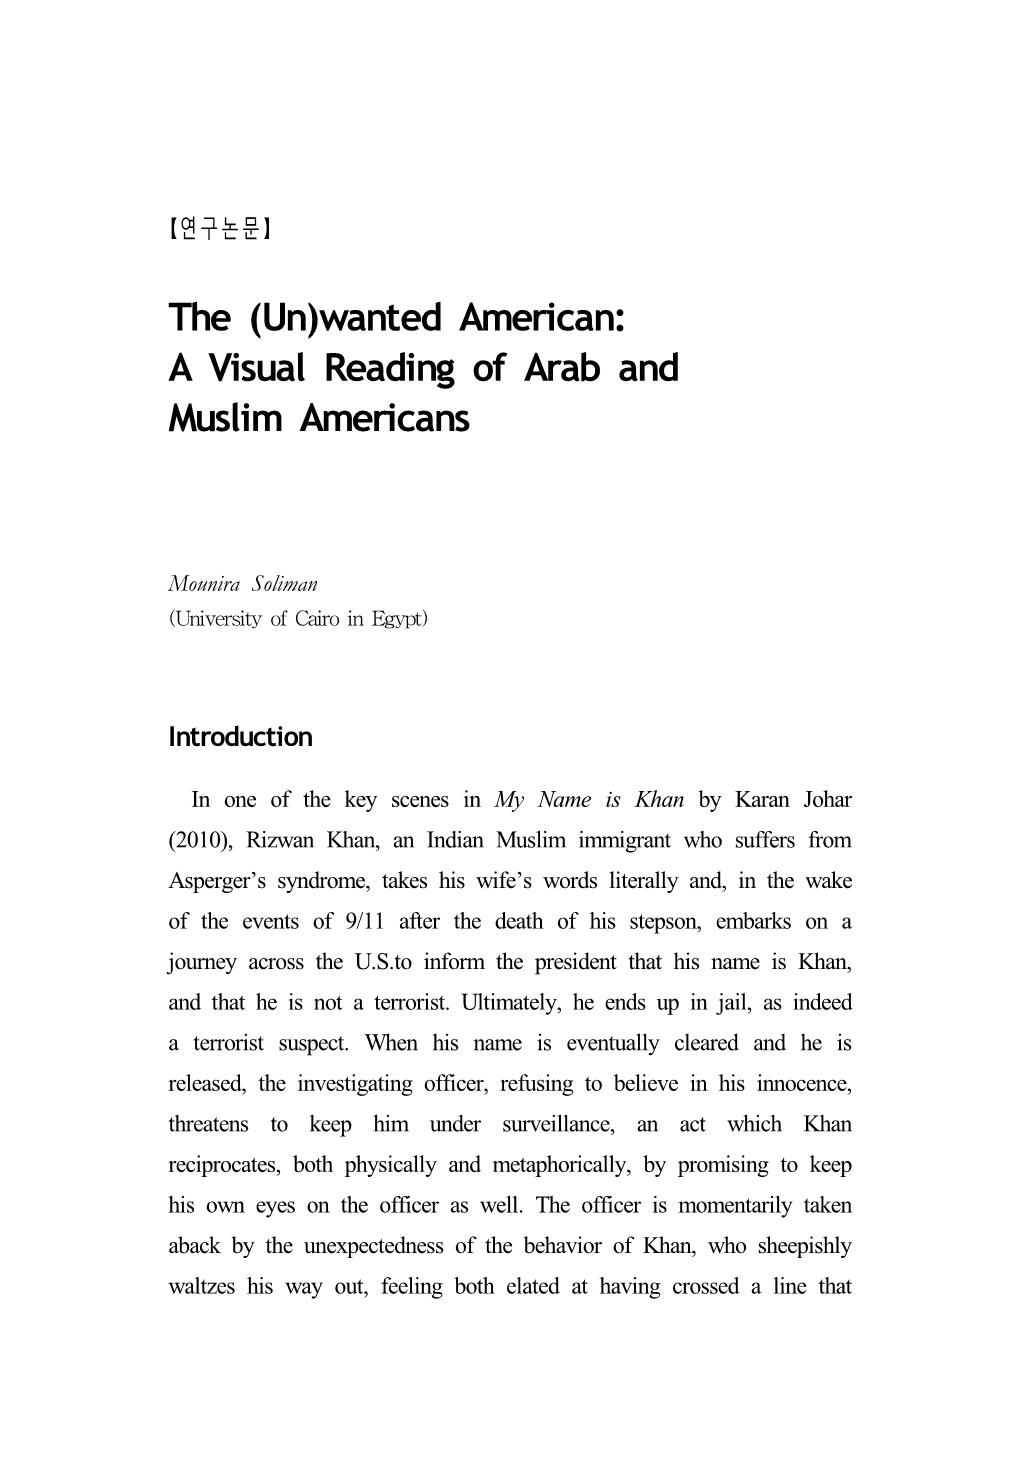 A Visual Reading of Arab and Muslim Americans